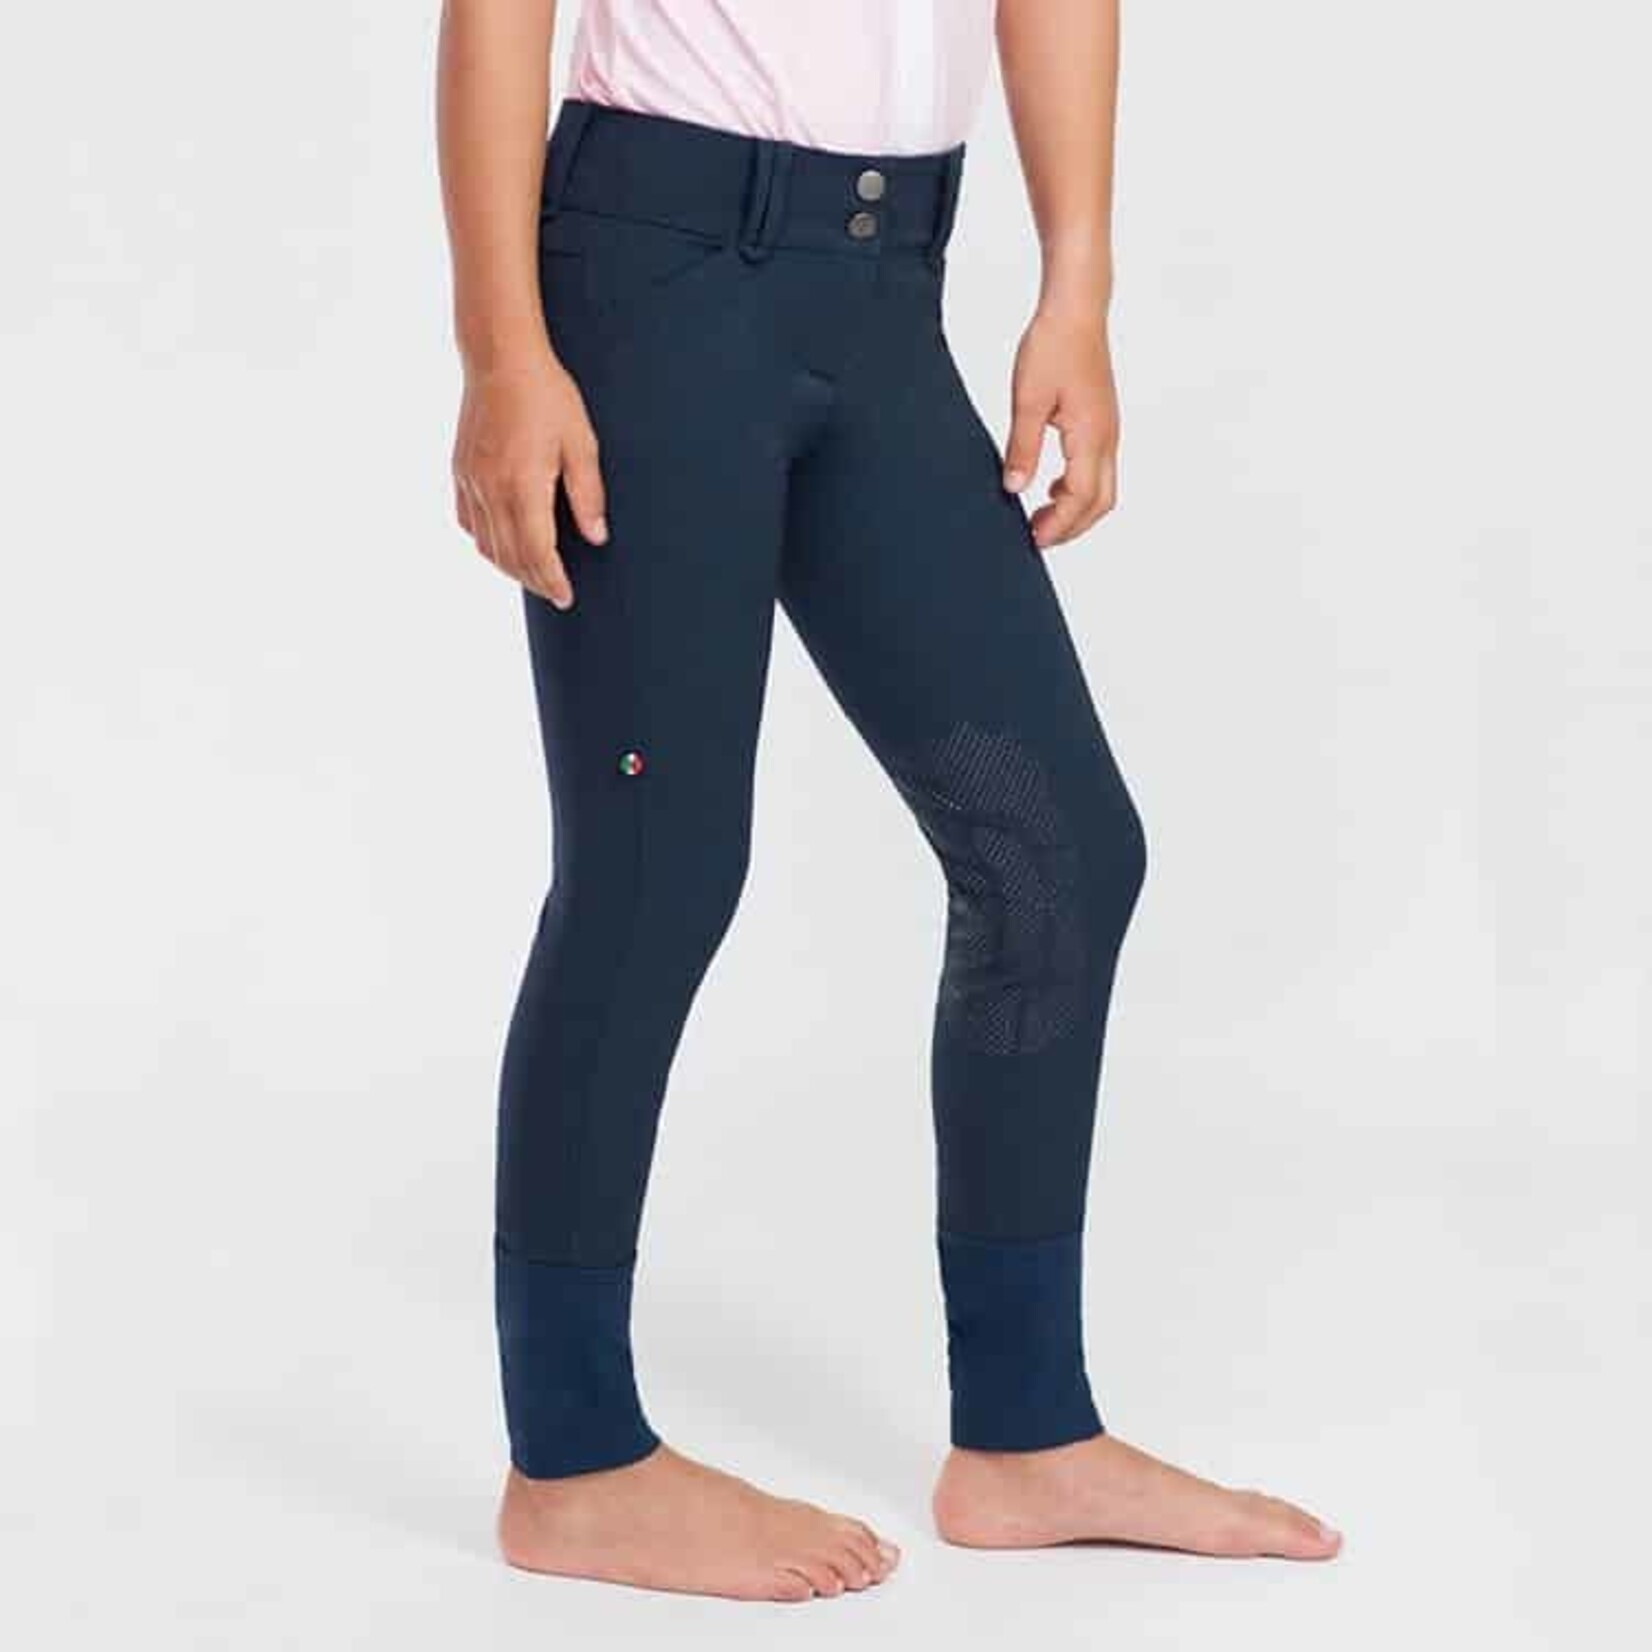 For Horses For Horses Elsa Junior Technical Breeches with Grip